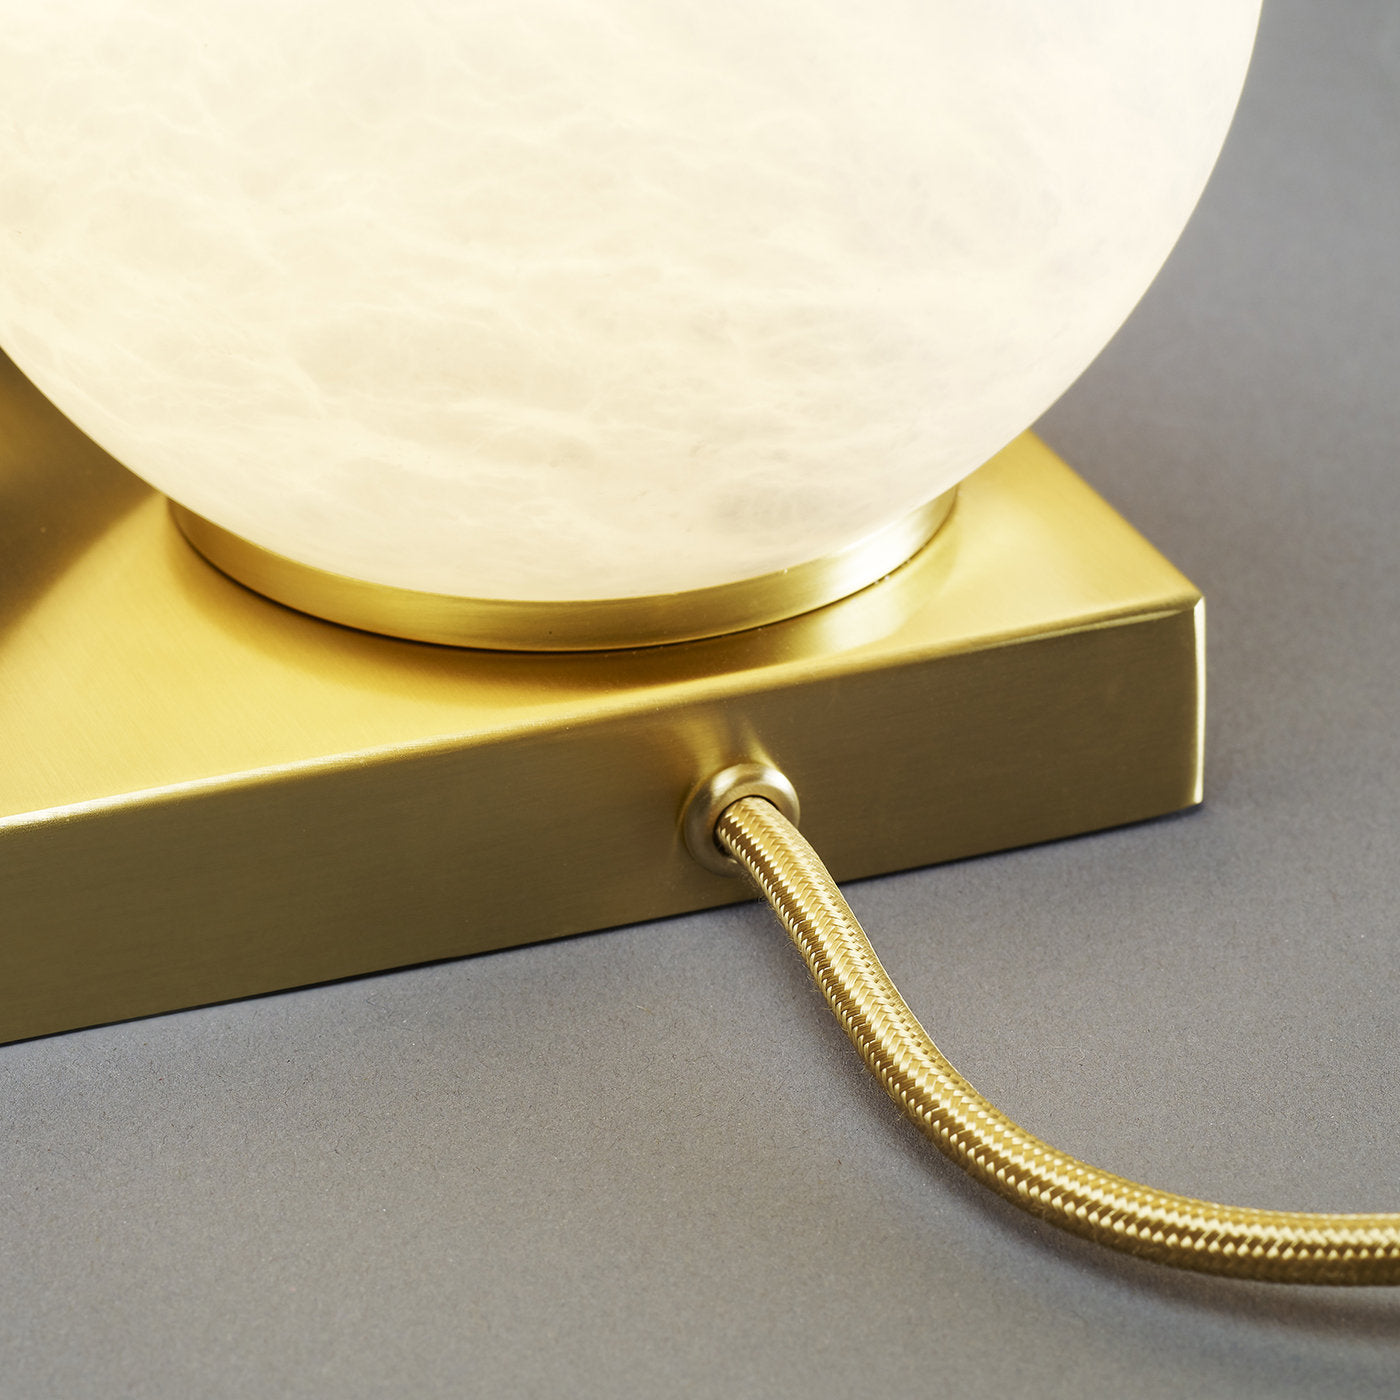 "Alabaster Moon" Table Lamp Dimmable in Satin Brass - Alternative view 2